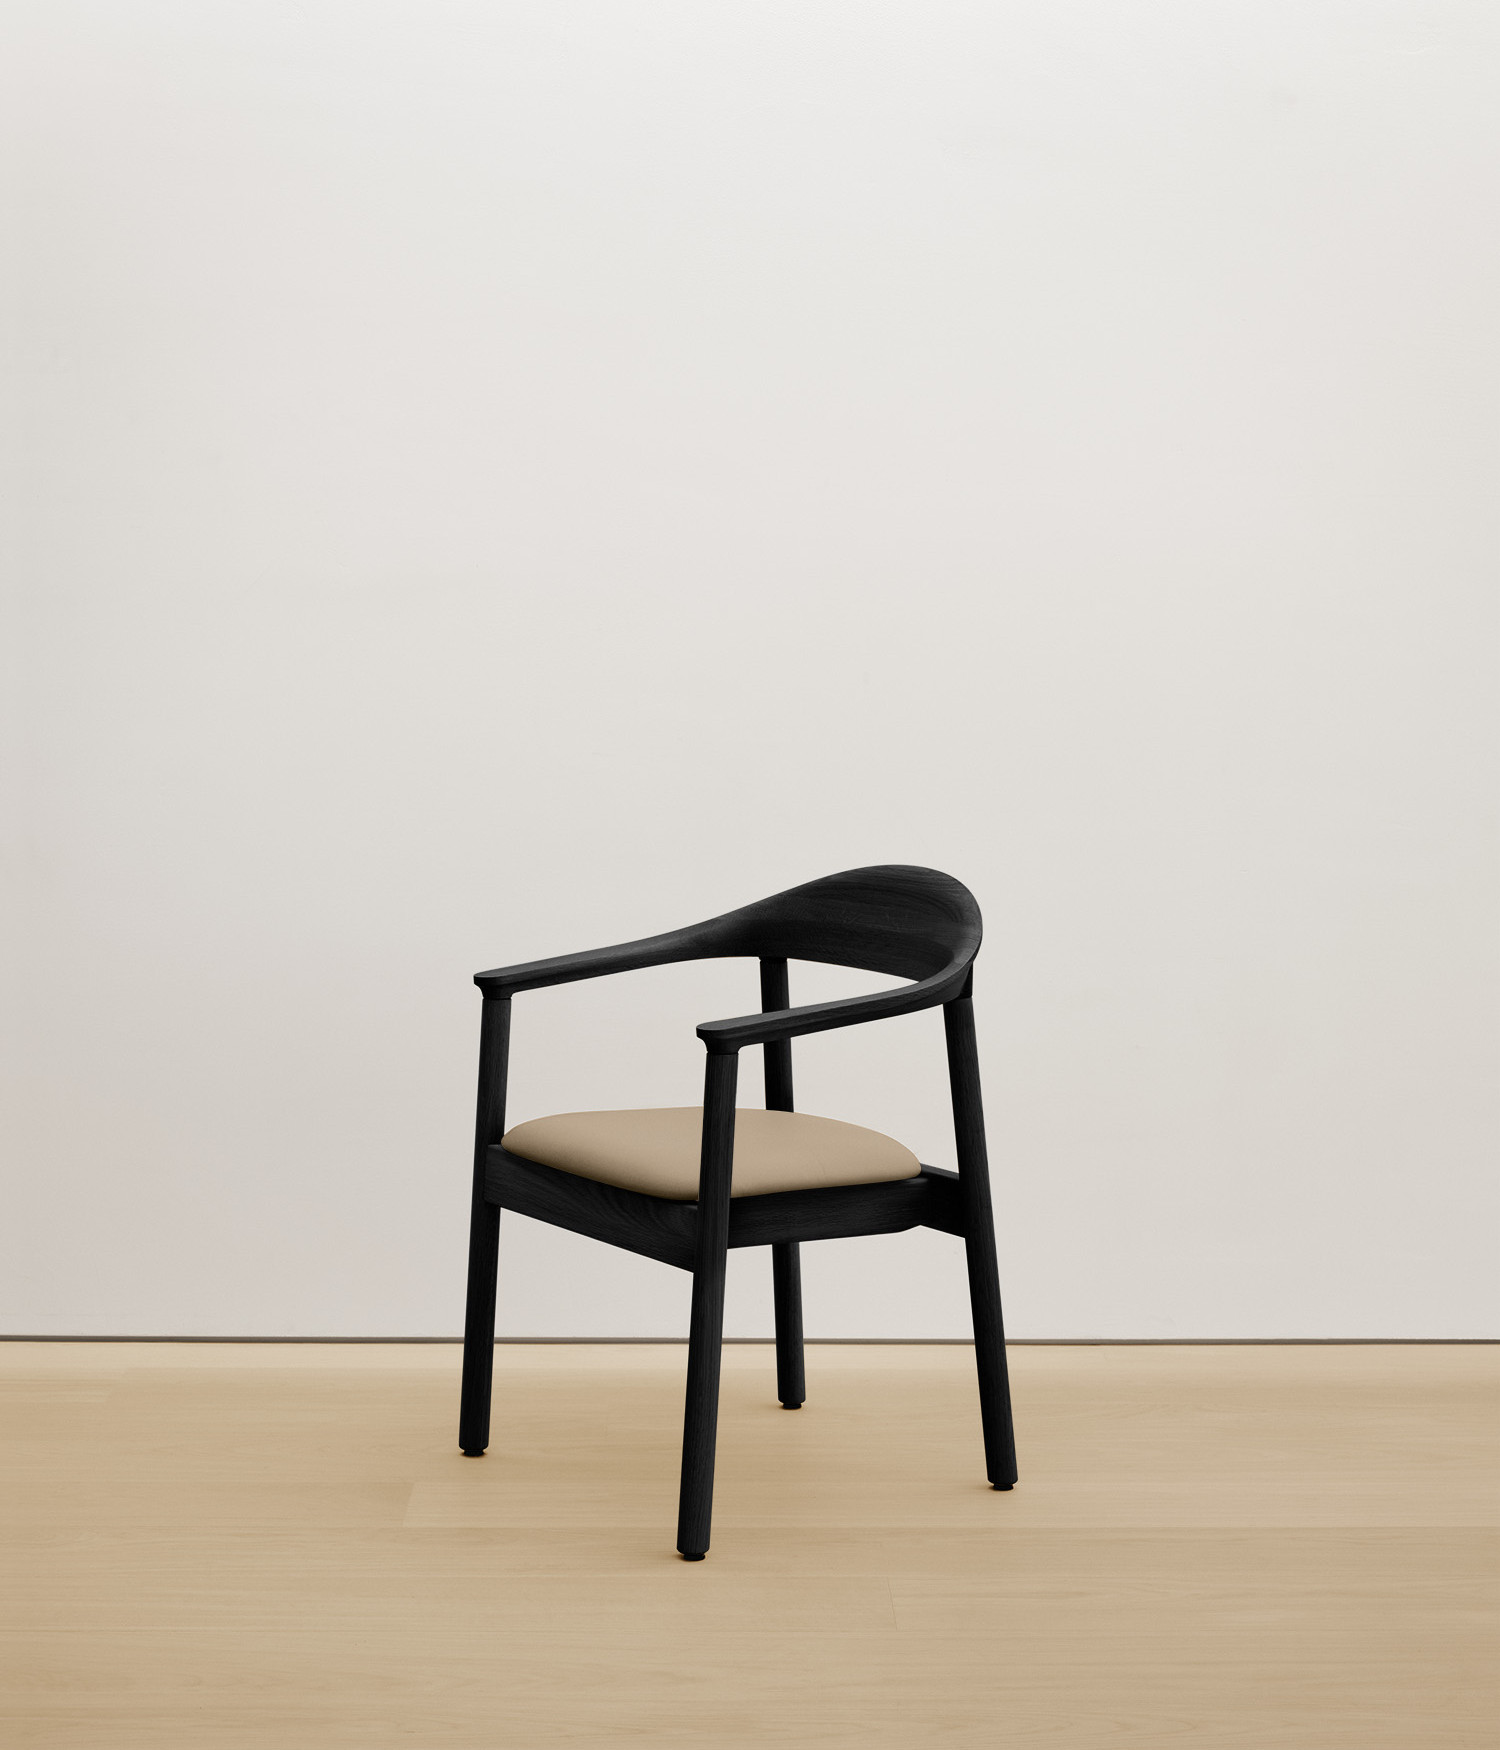 black-stained-oak chair with cream color upholstered seat 